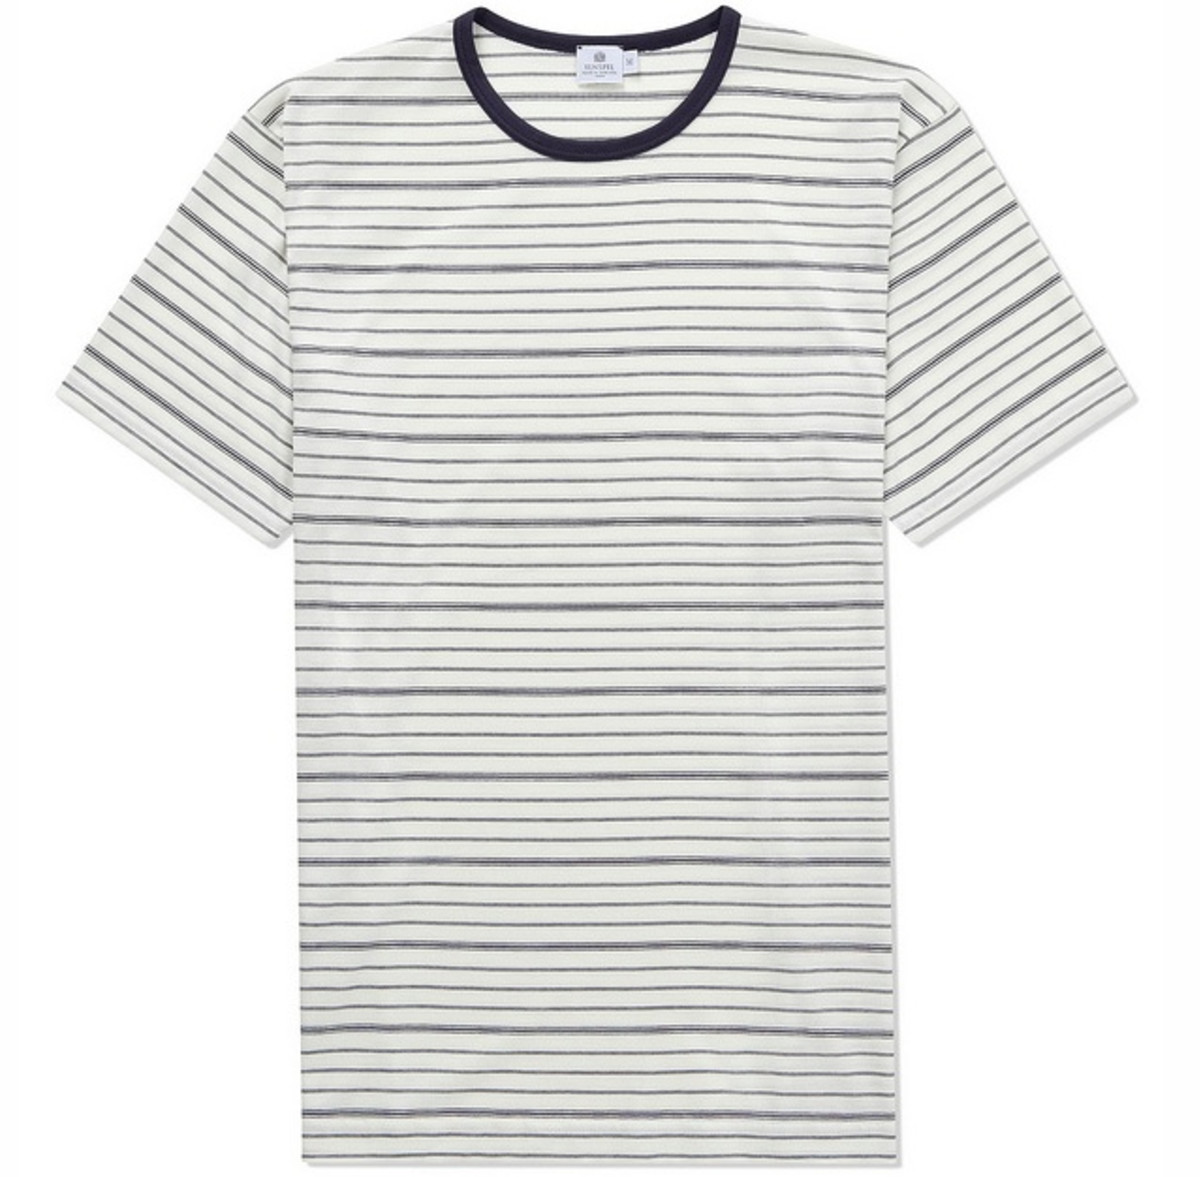 Sunspel Offers 20 Percent Off All Striped Items | Complex